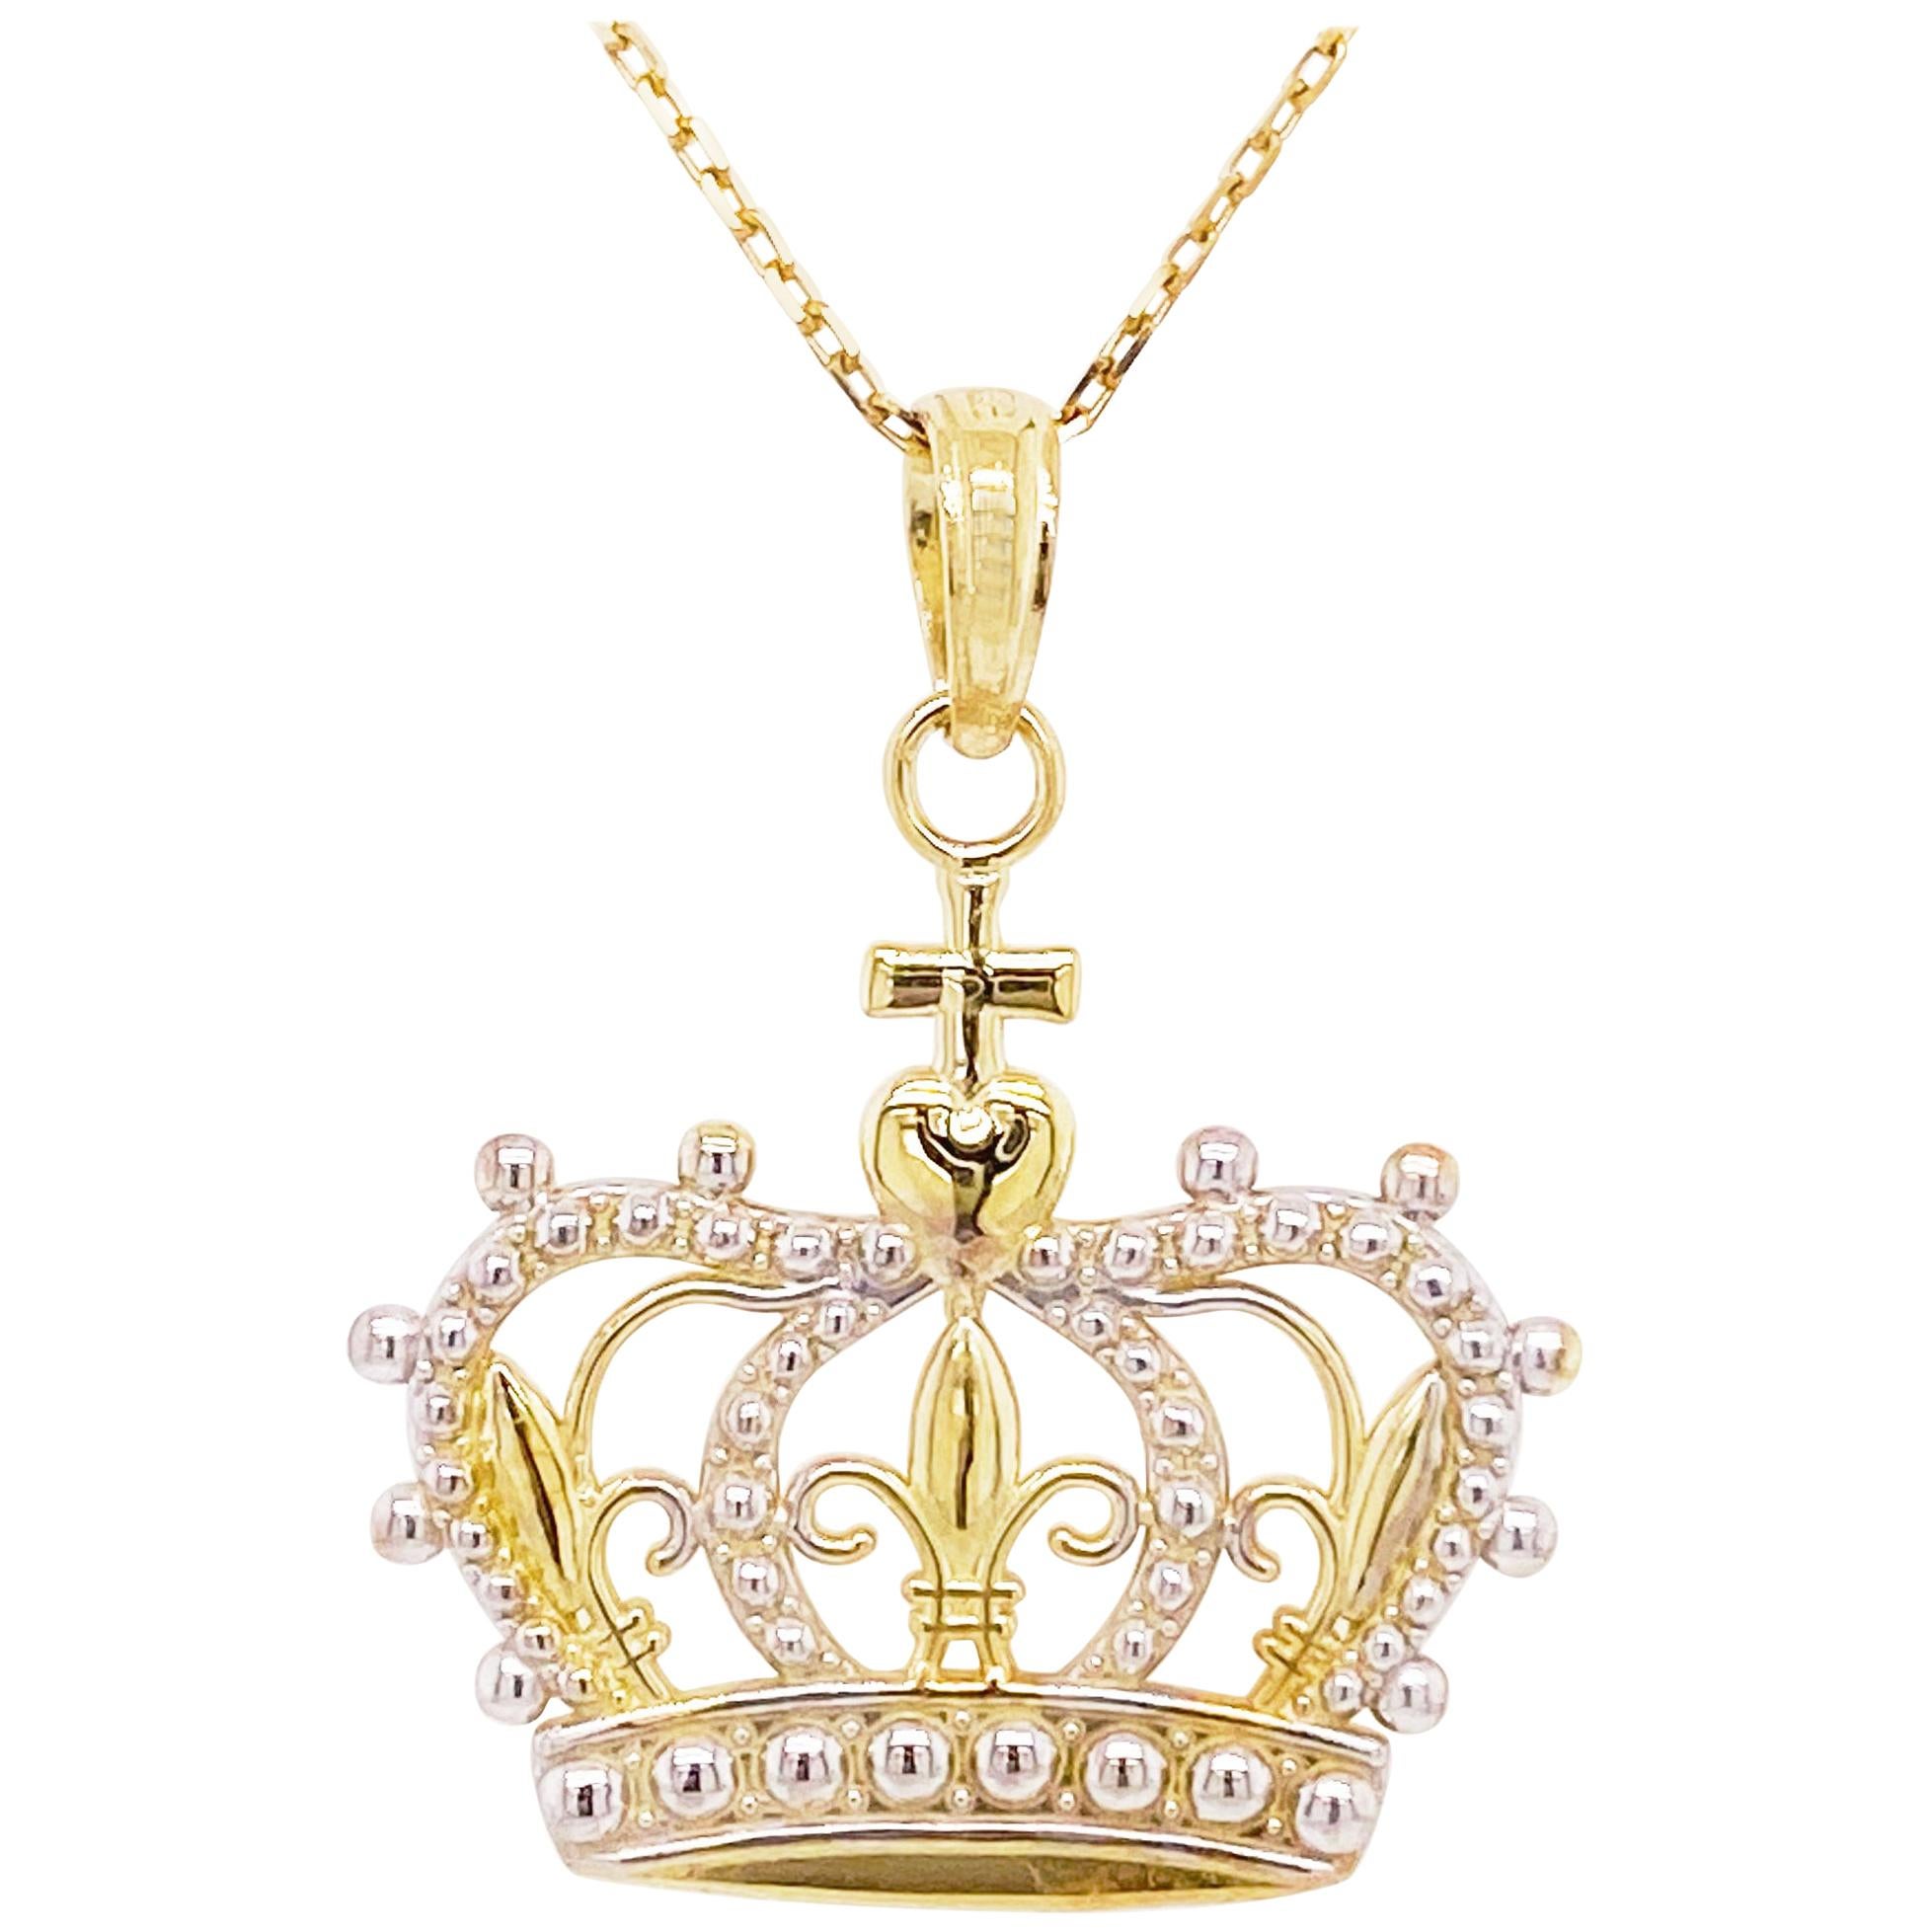 Gold Crown Necklace Pendant Mixed Metals You Are A Princess or Queen